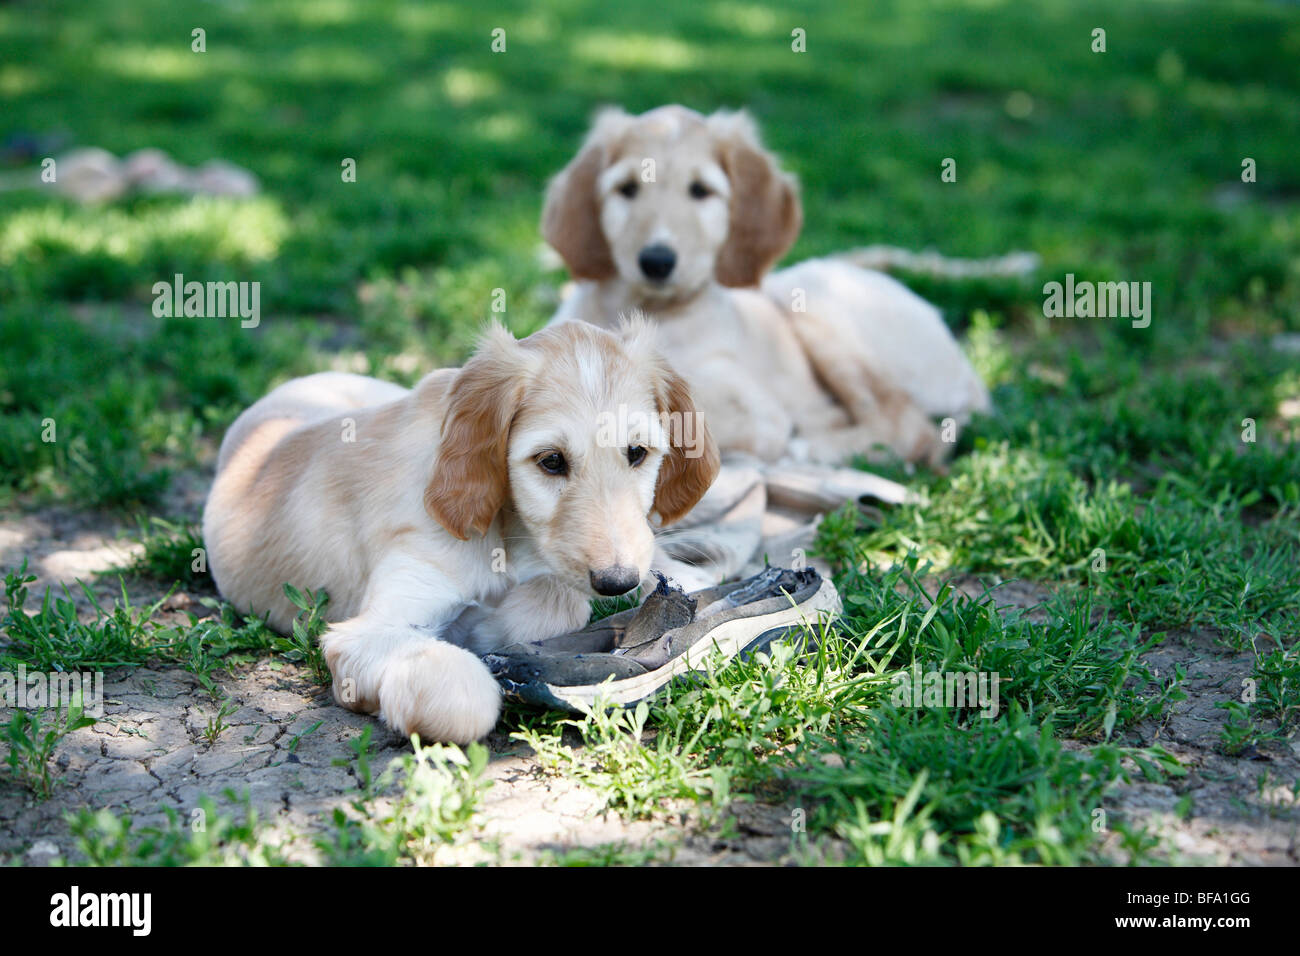 Afghanistan Hound, Afghan Hound (Canis lupus f. familiaris), puppy chewing a shoe, another one lying beside Stock Photo